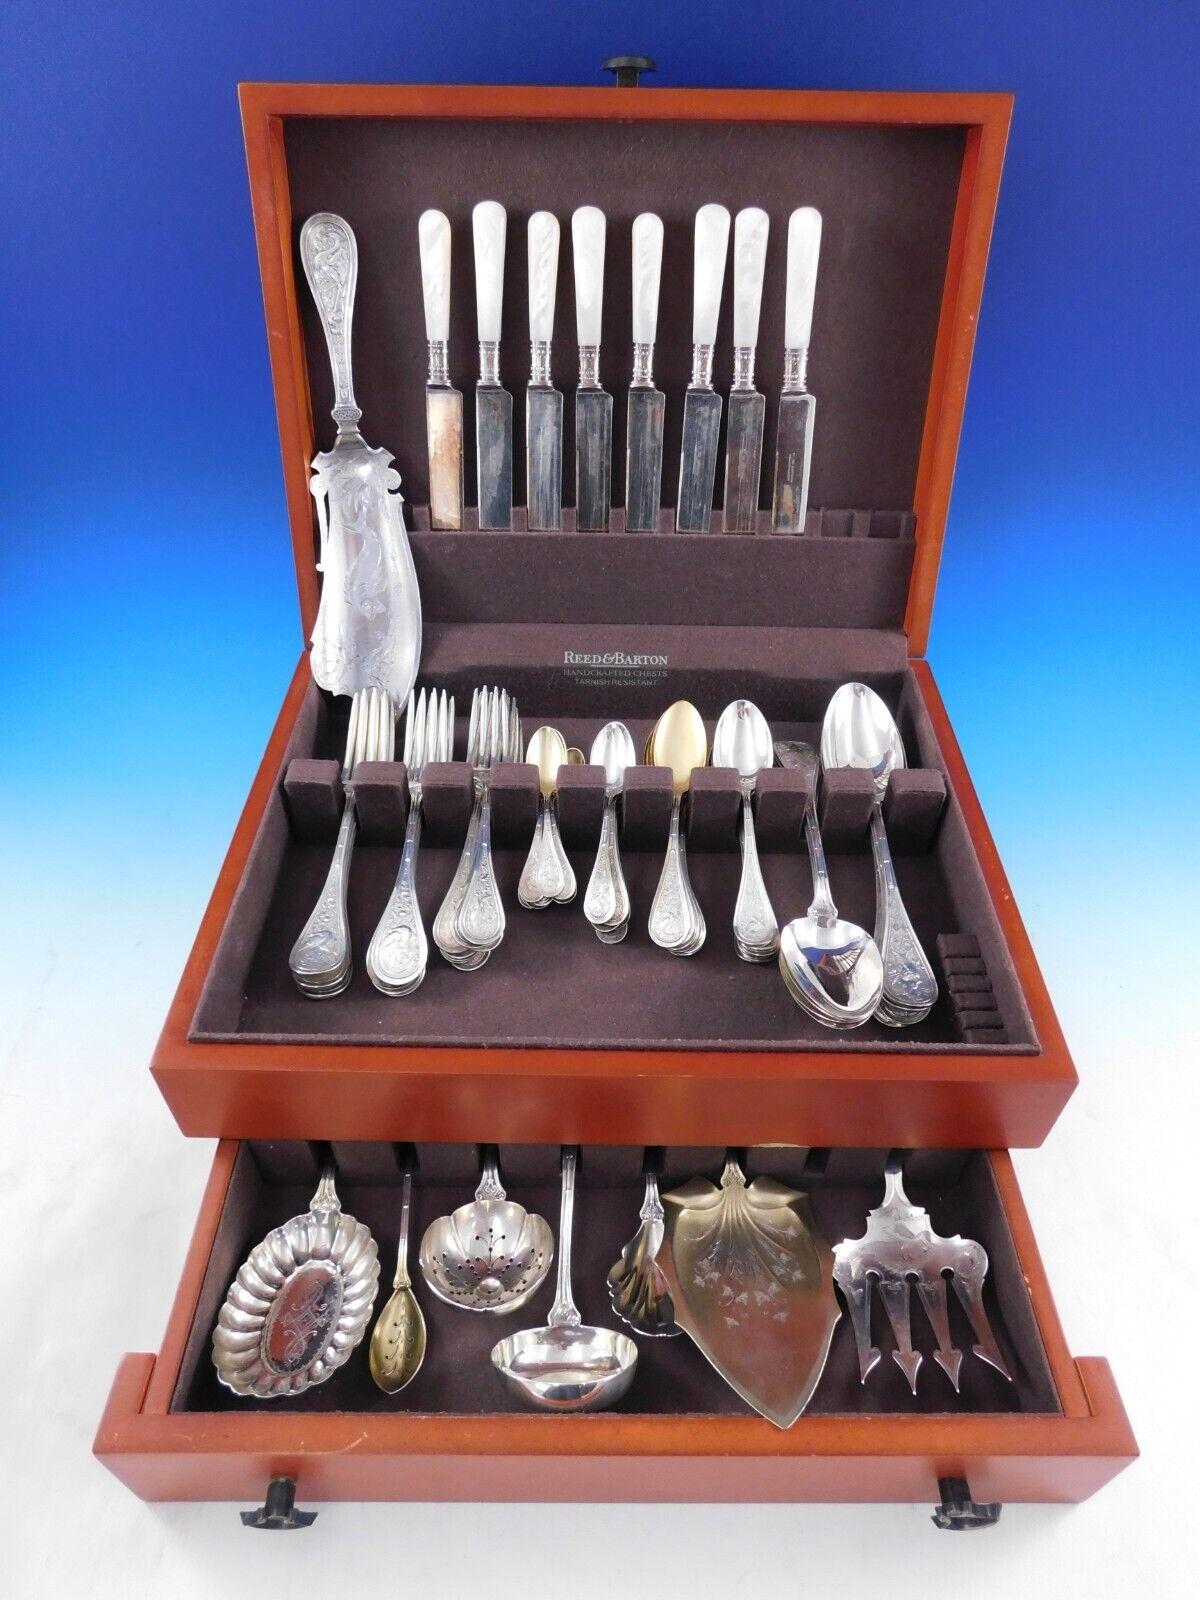 Rare Bird by Wendt, circa 1872, sterling silver Flatware set - 72 pieces. This multi-motif Japonesque pattern has a bamboo design running up the handle, with a swooping or plunging bird amidst assorted flora. This set includes:

8 Knives, flat